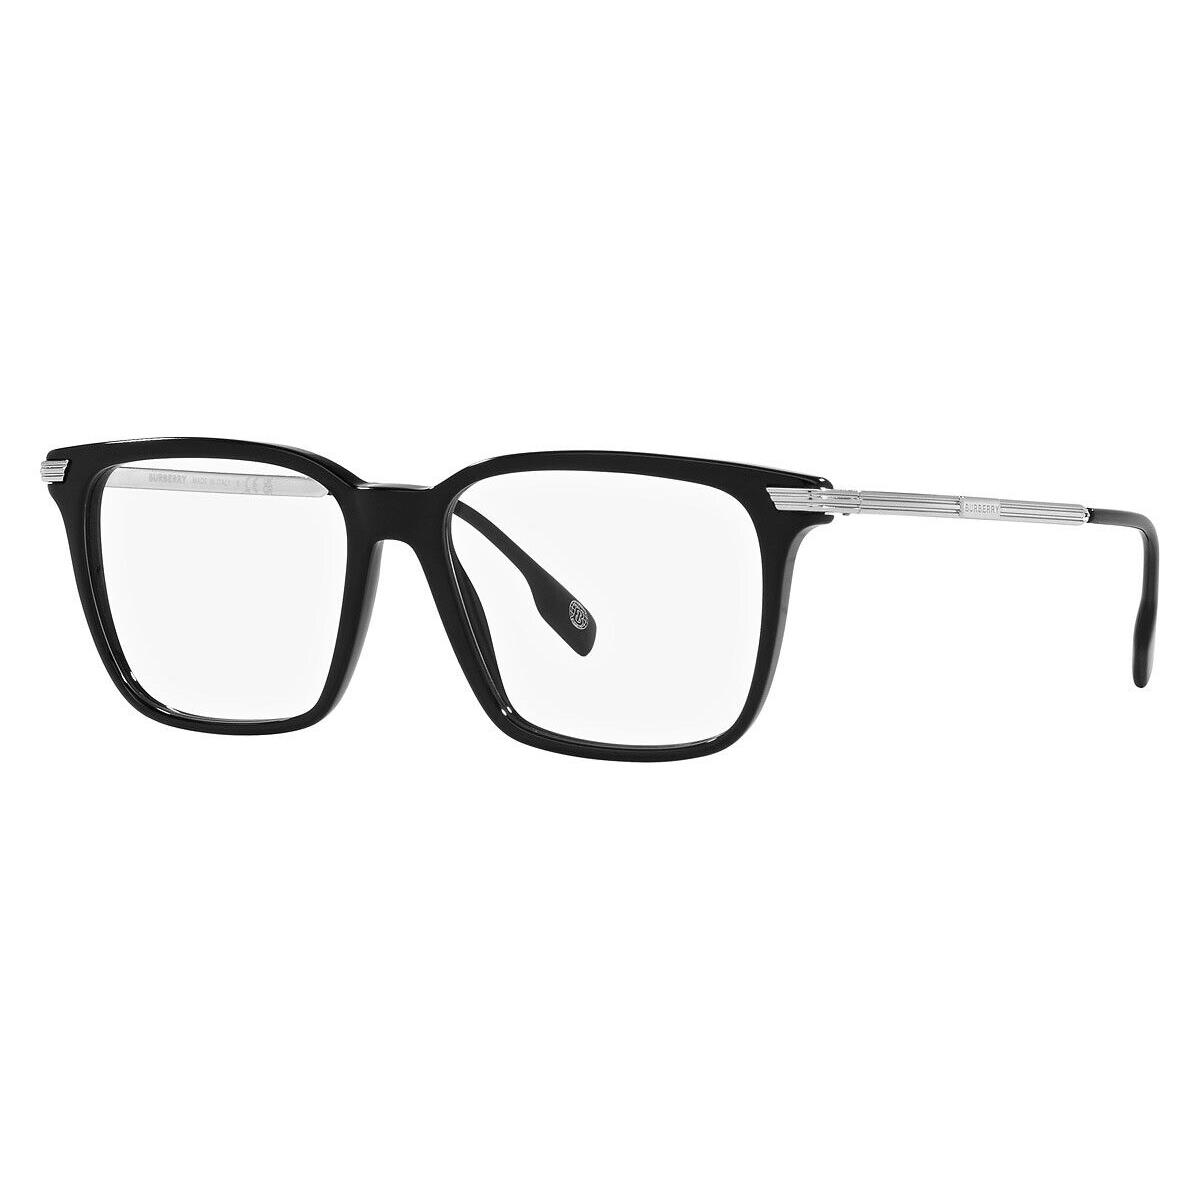 Burberry Ellis BE2378 Eyeglasses Black and Silver Square 55mm - Frame: Black and Silver, Lens: